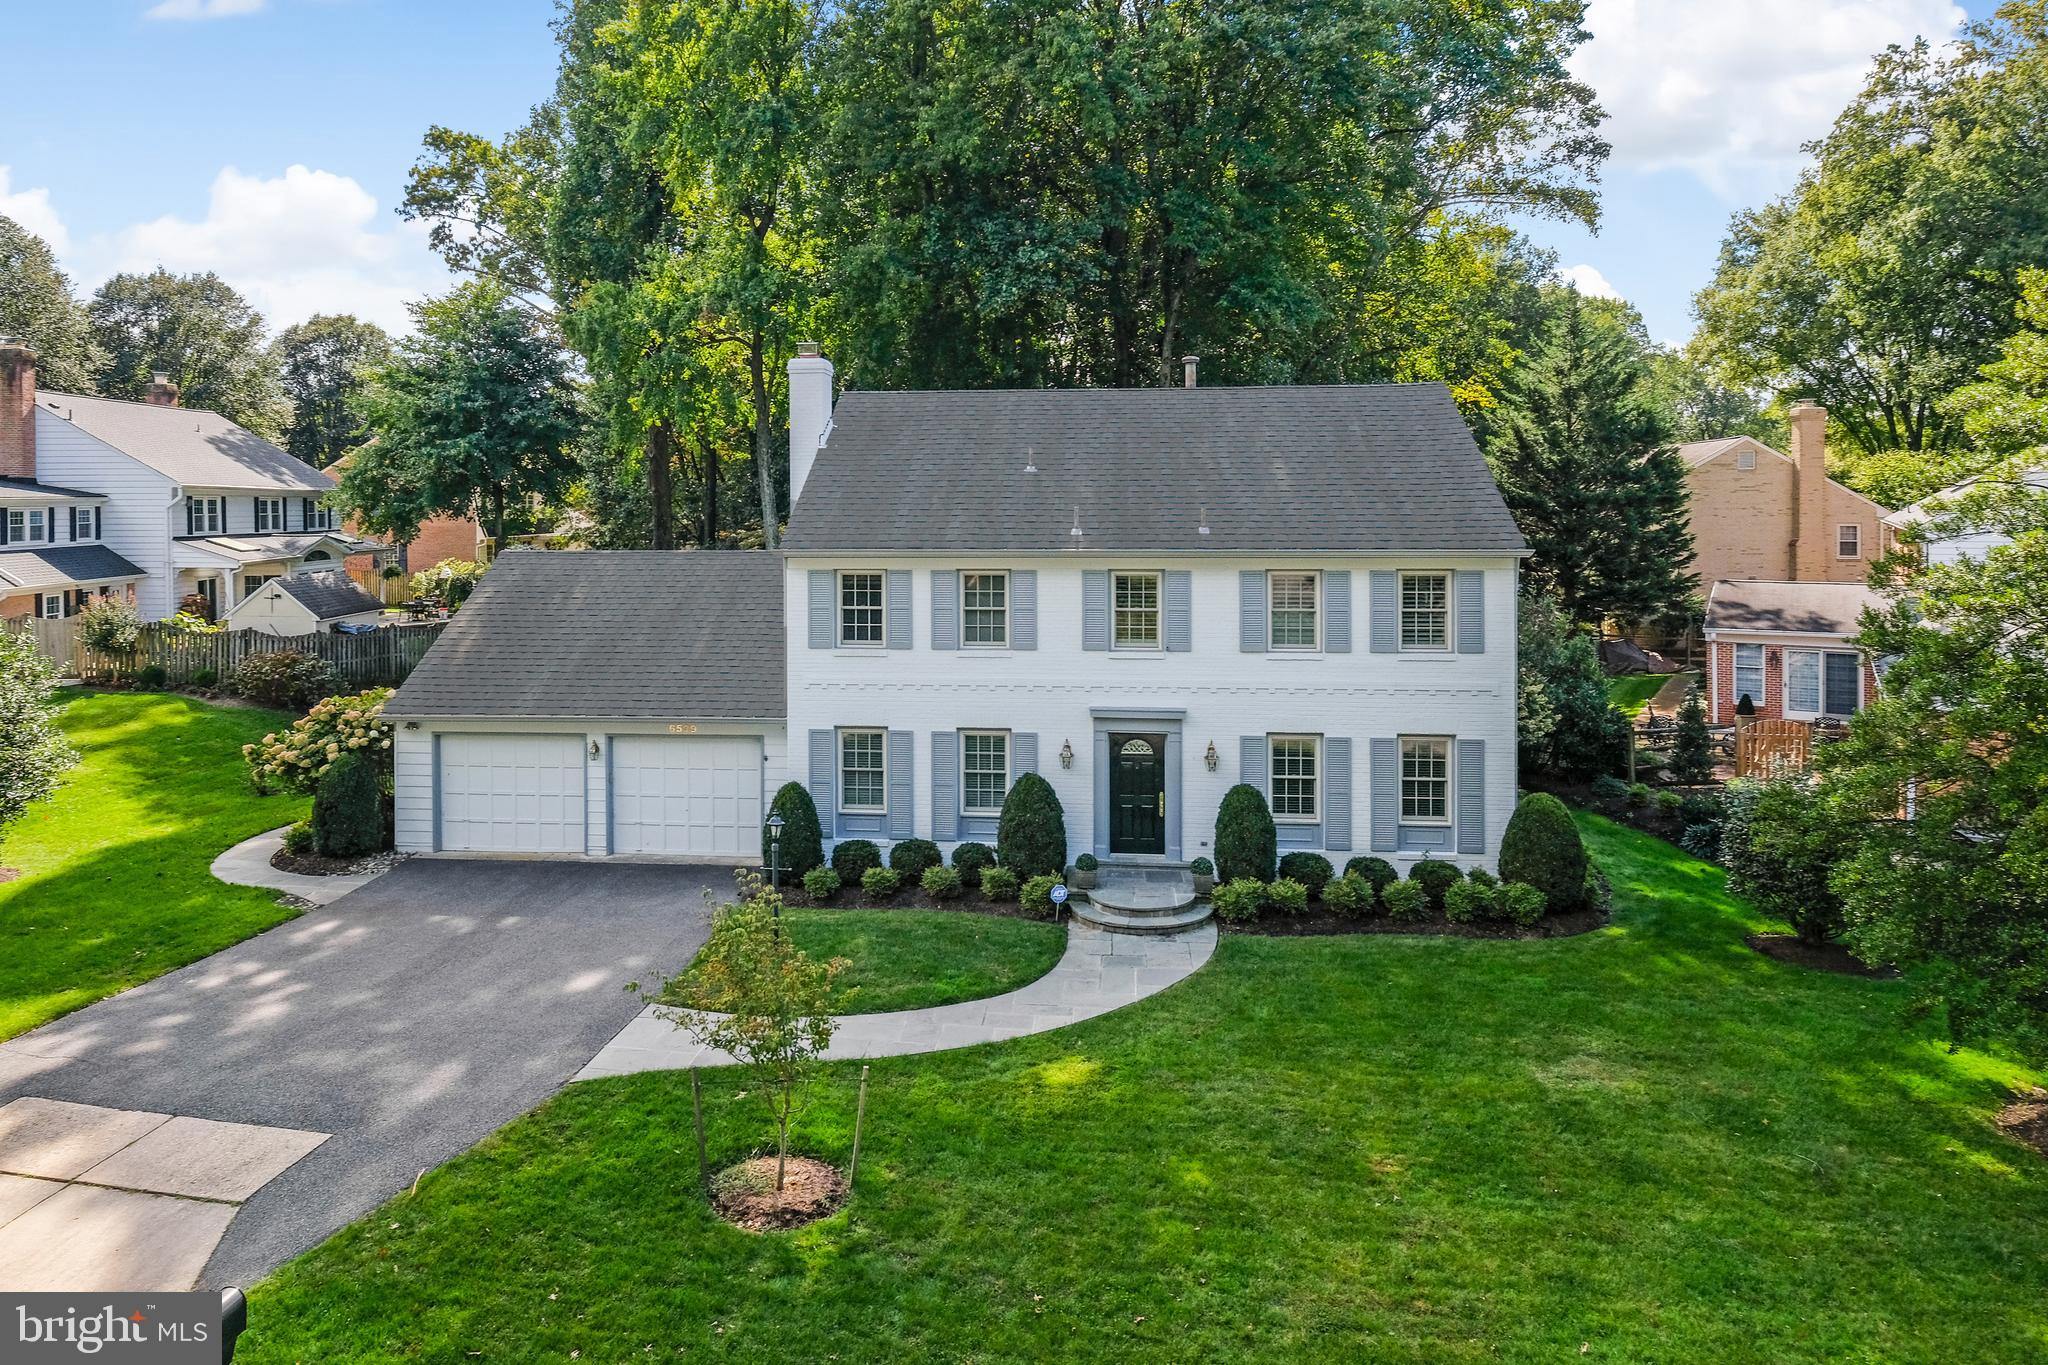 Fall in love with 6539 Windermere Circle; this elegant painted brick colonial is sited on a private 